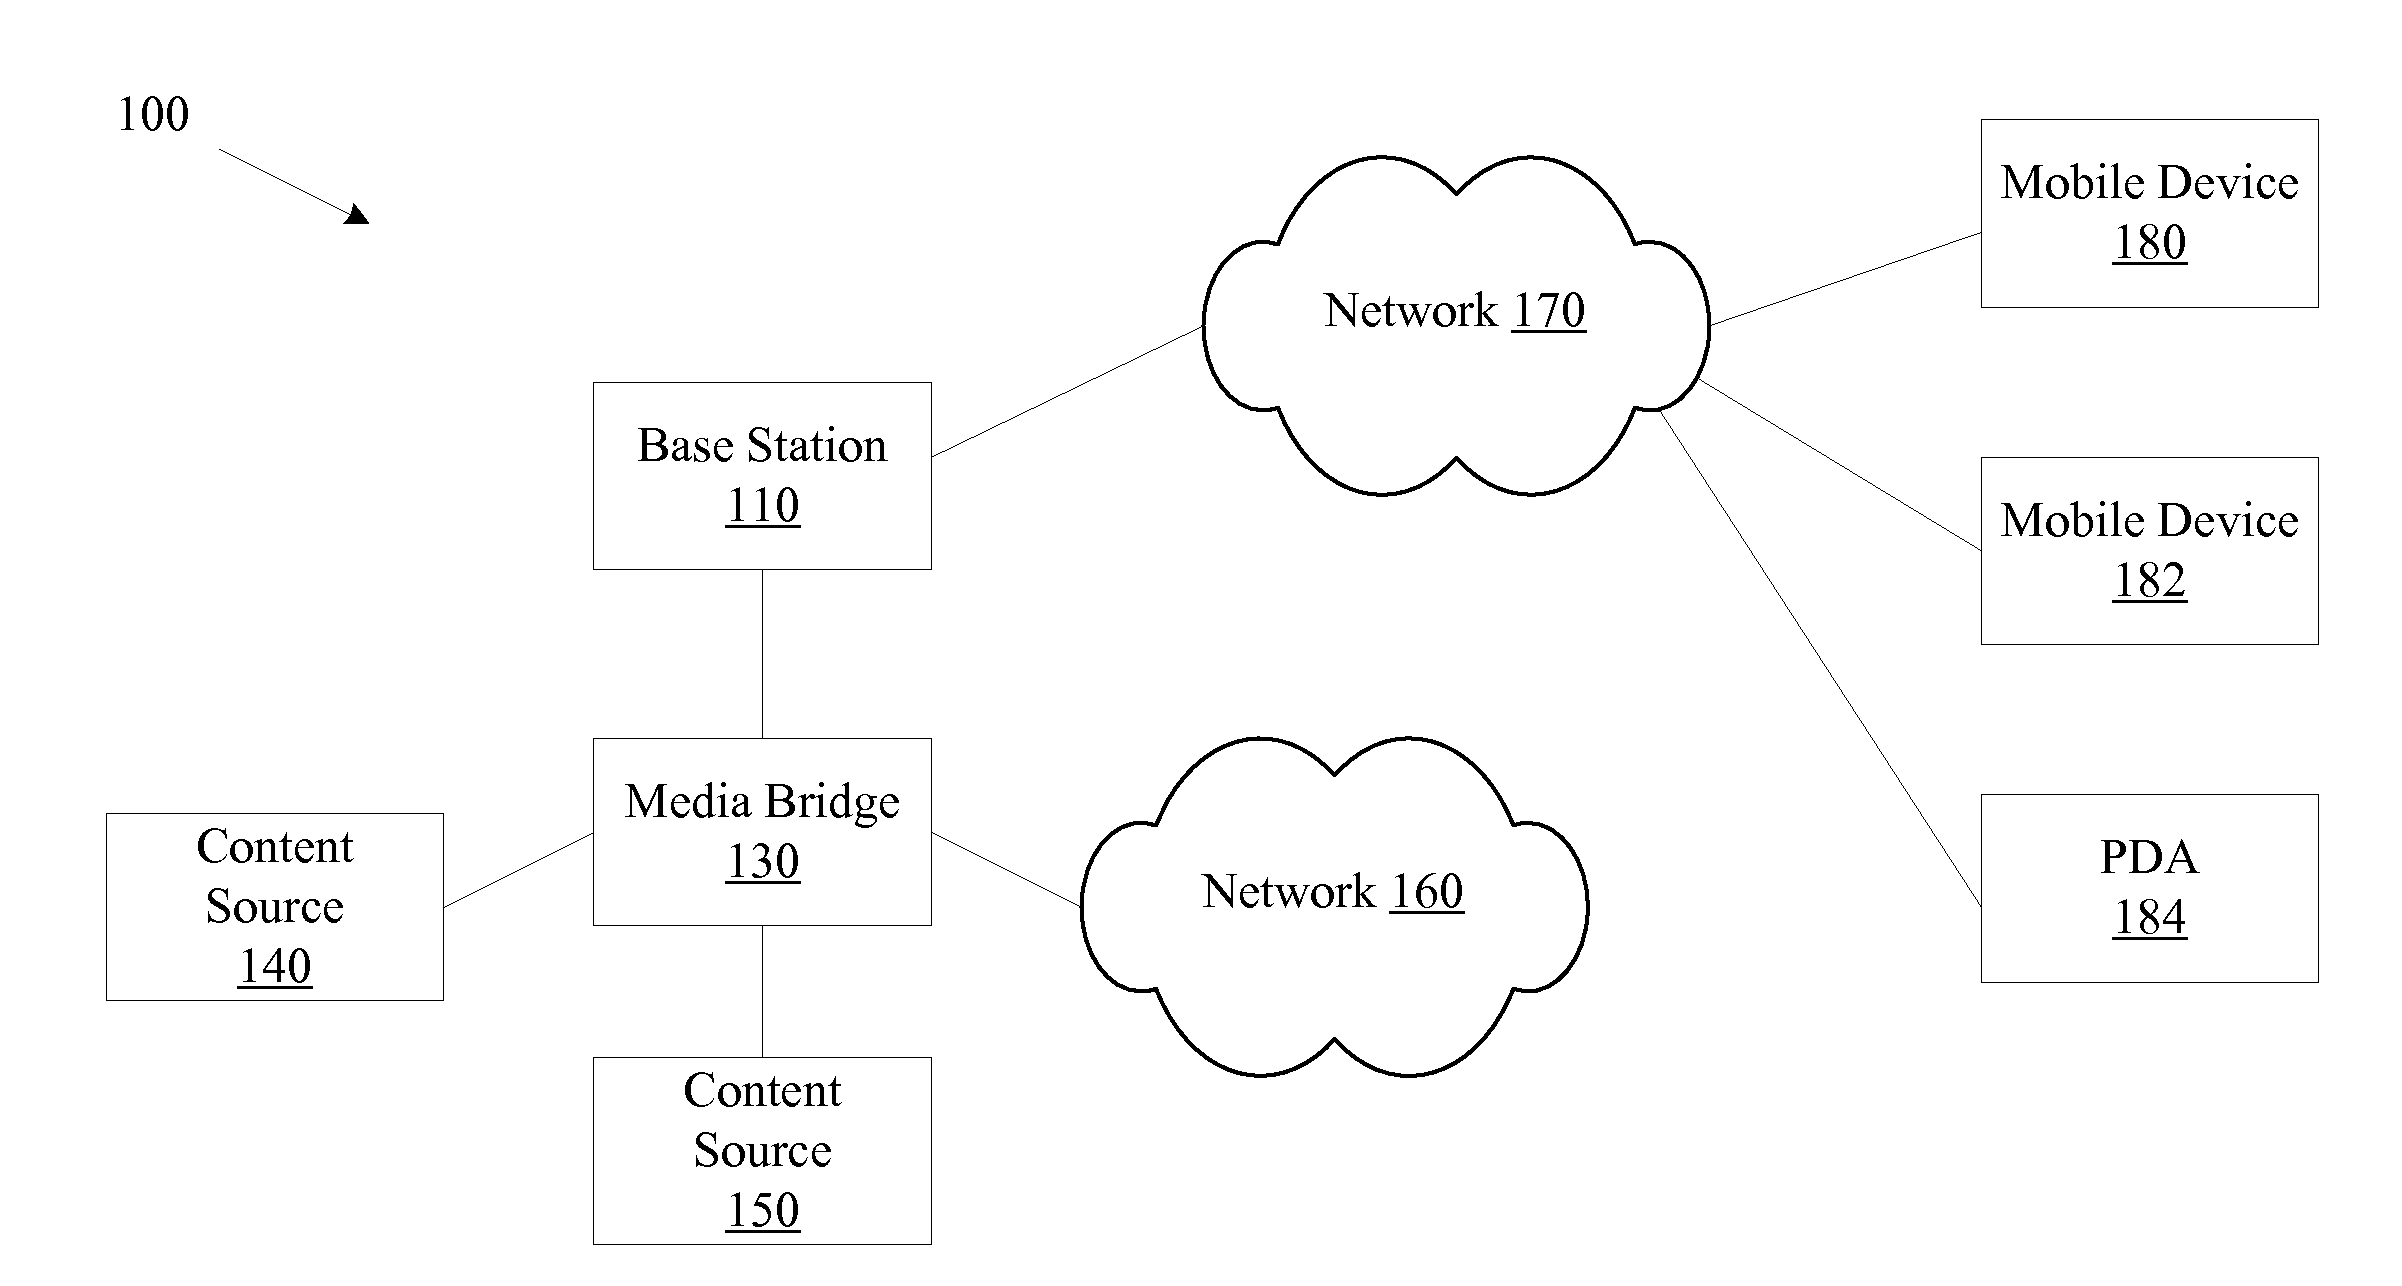 Providing Devices With Command Functionality in Content Streams